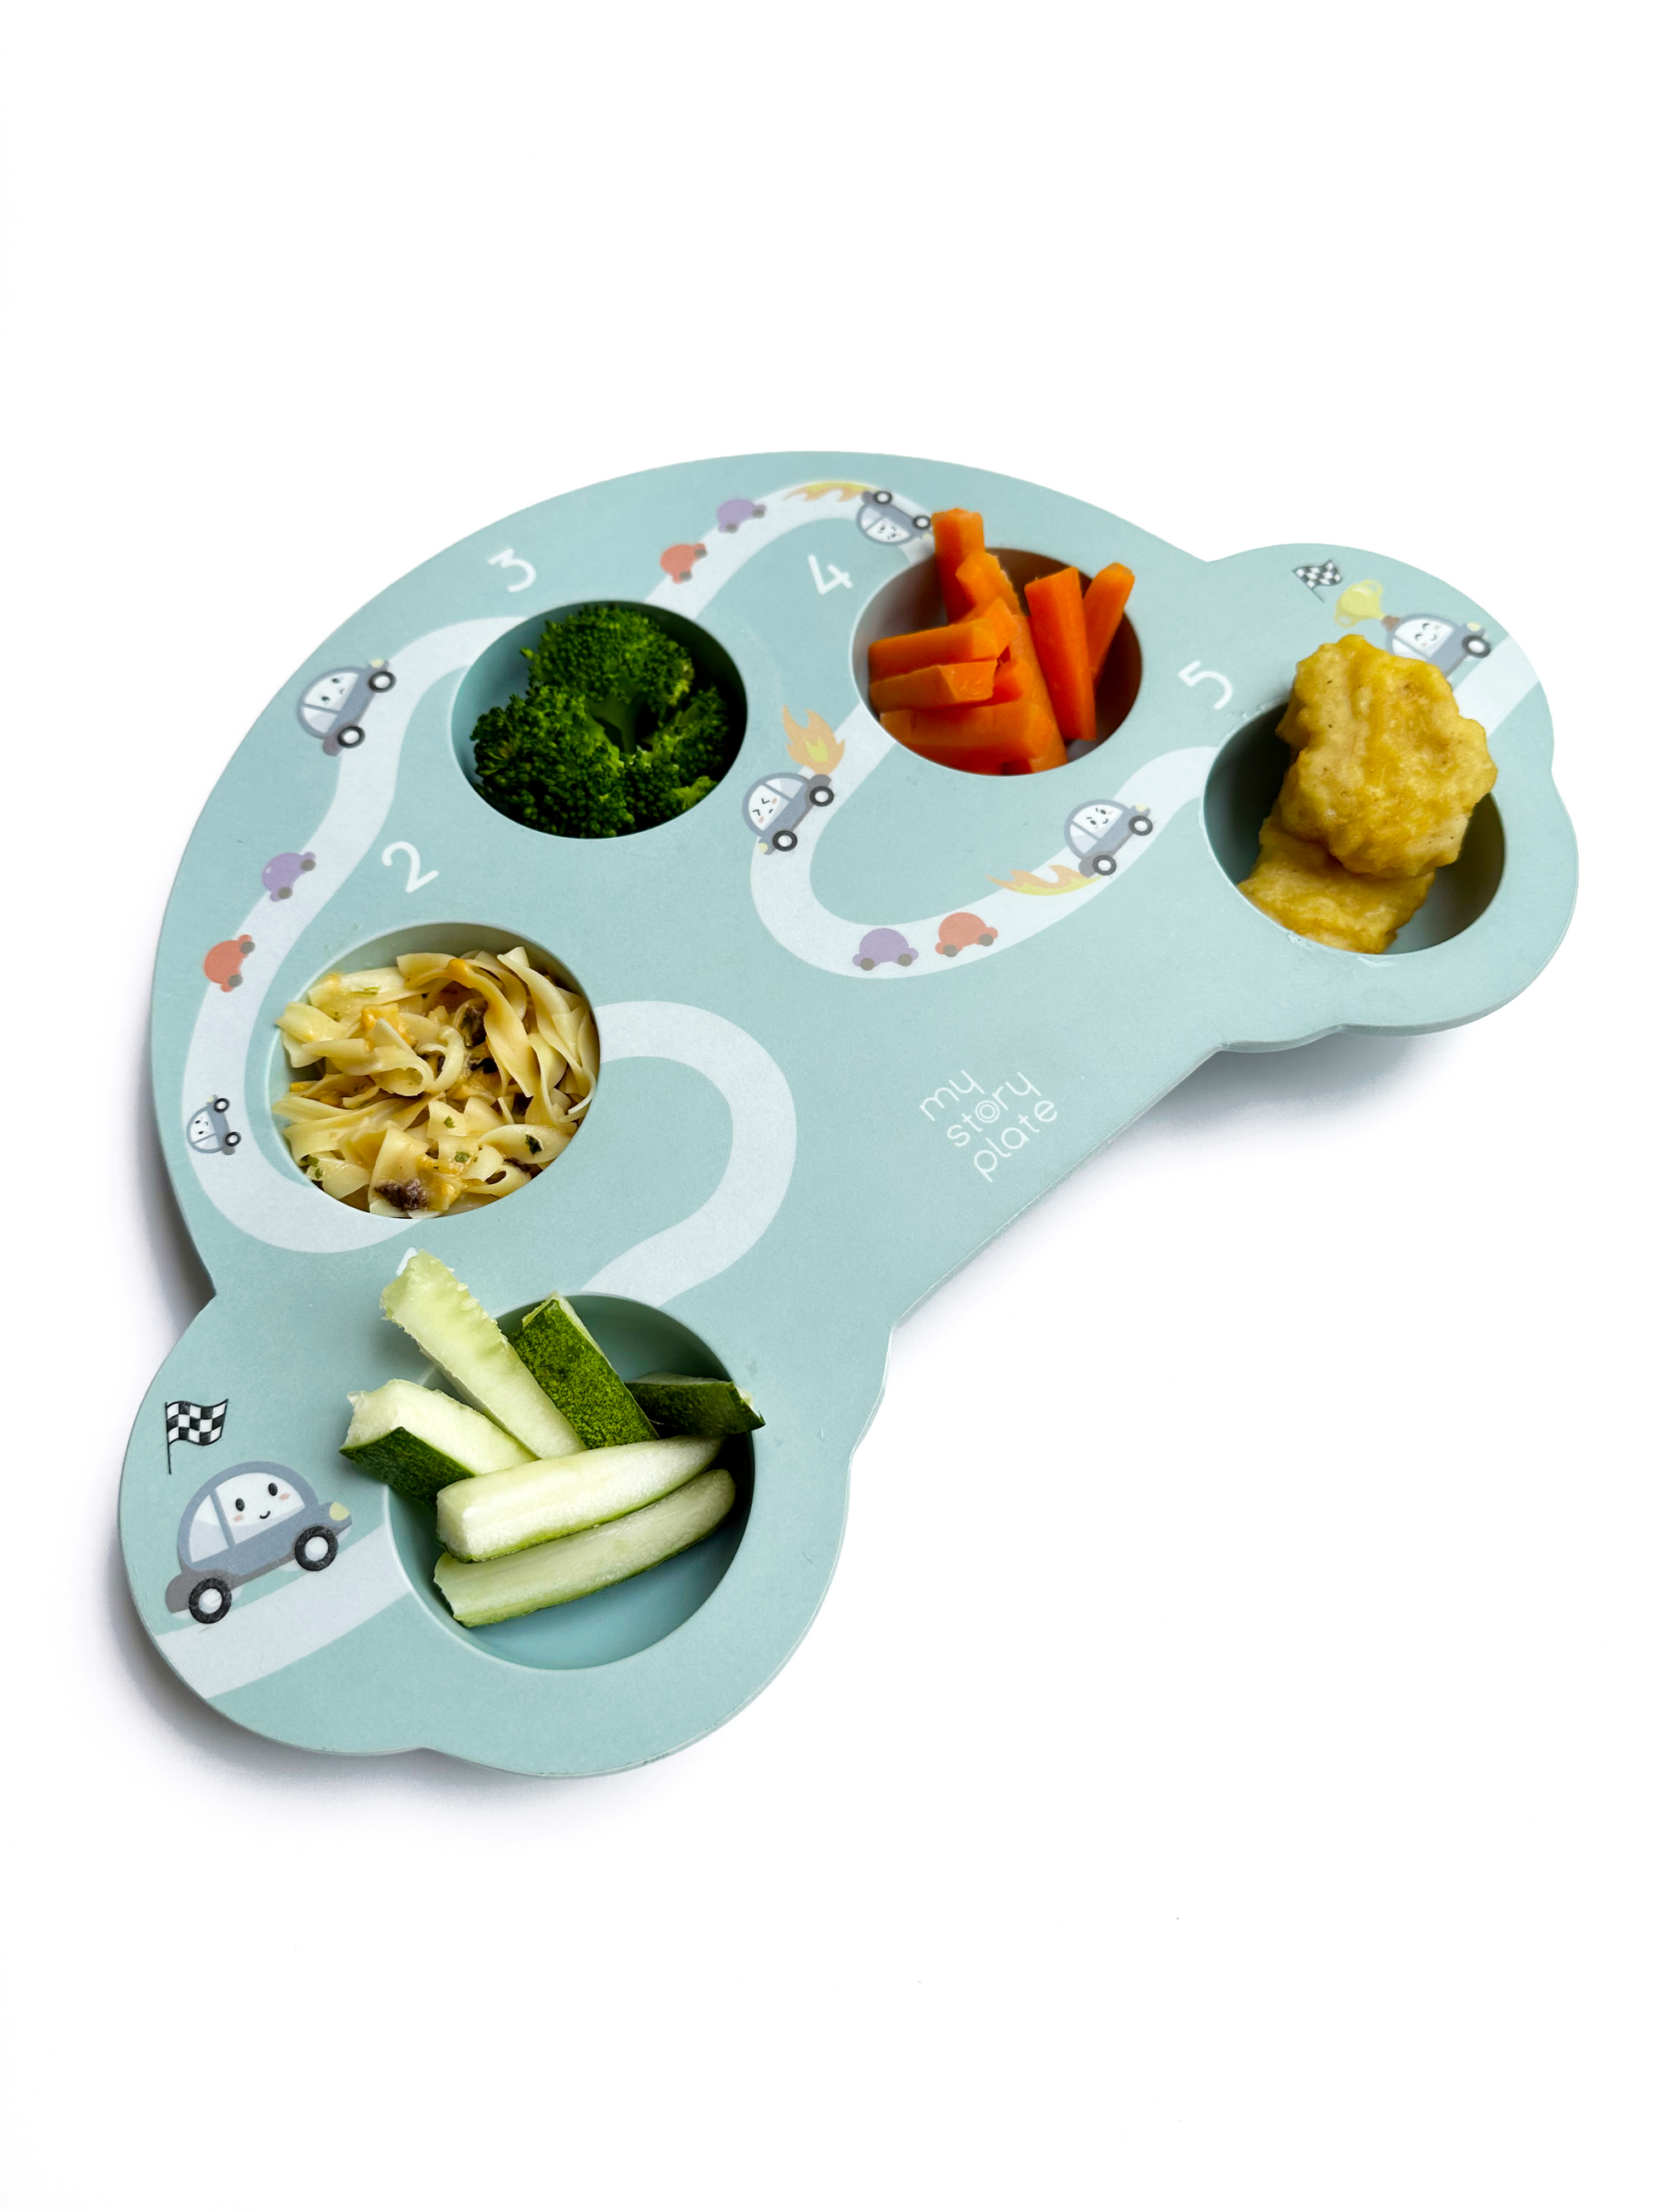 Numbered pods from 1 to 5 to guide kids to eat continuously to finish a meal.